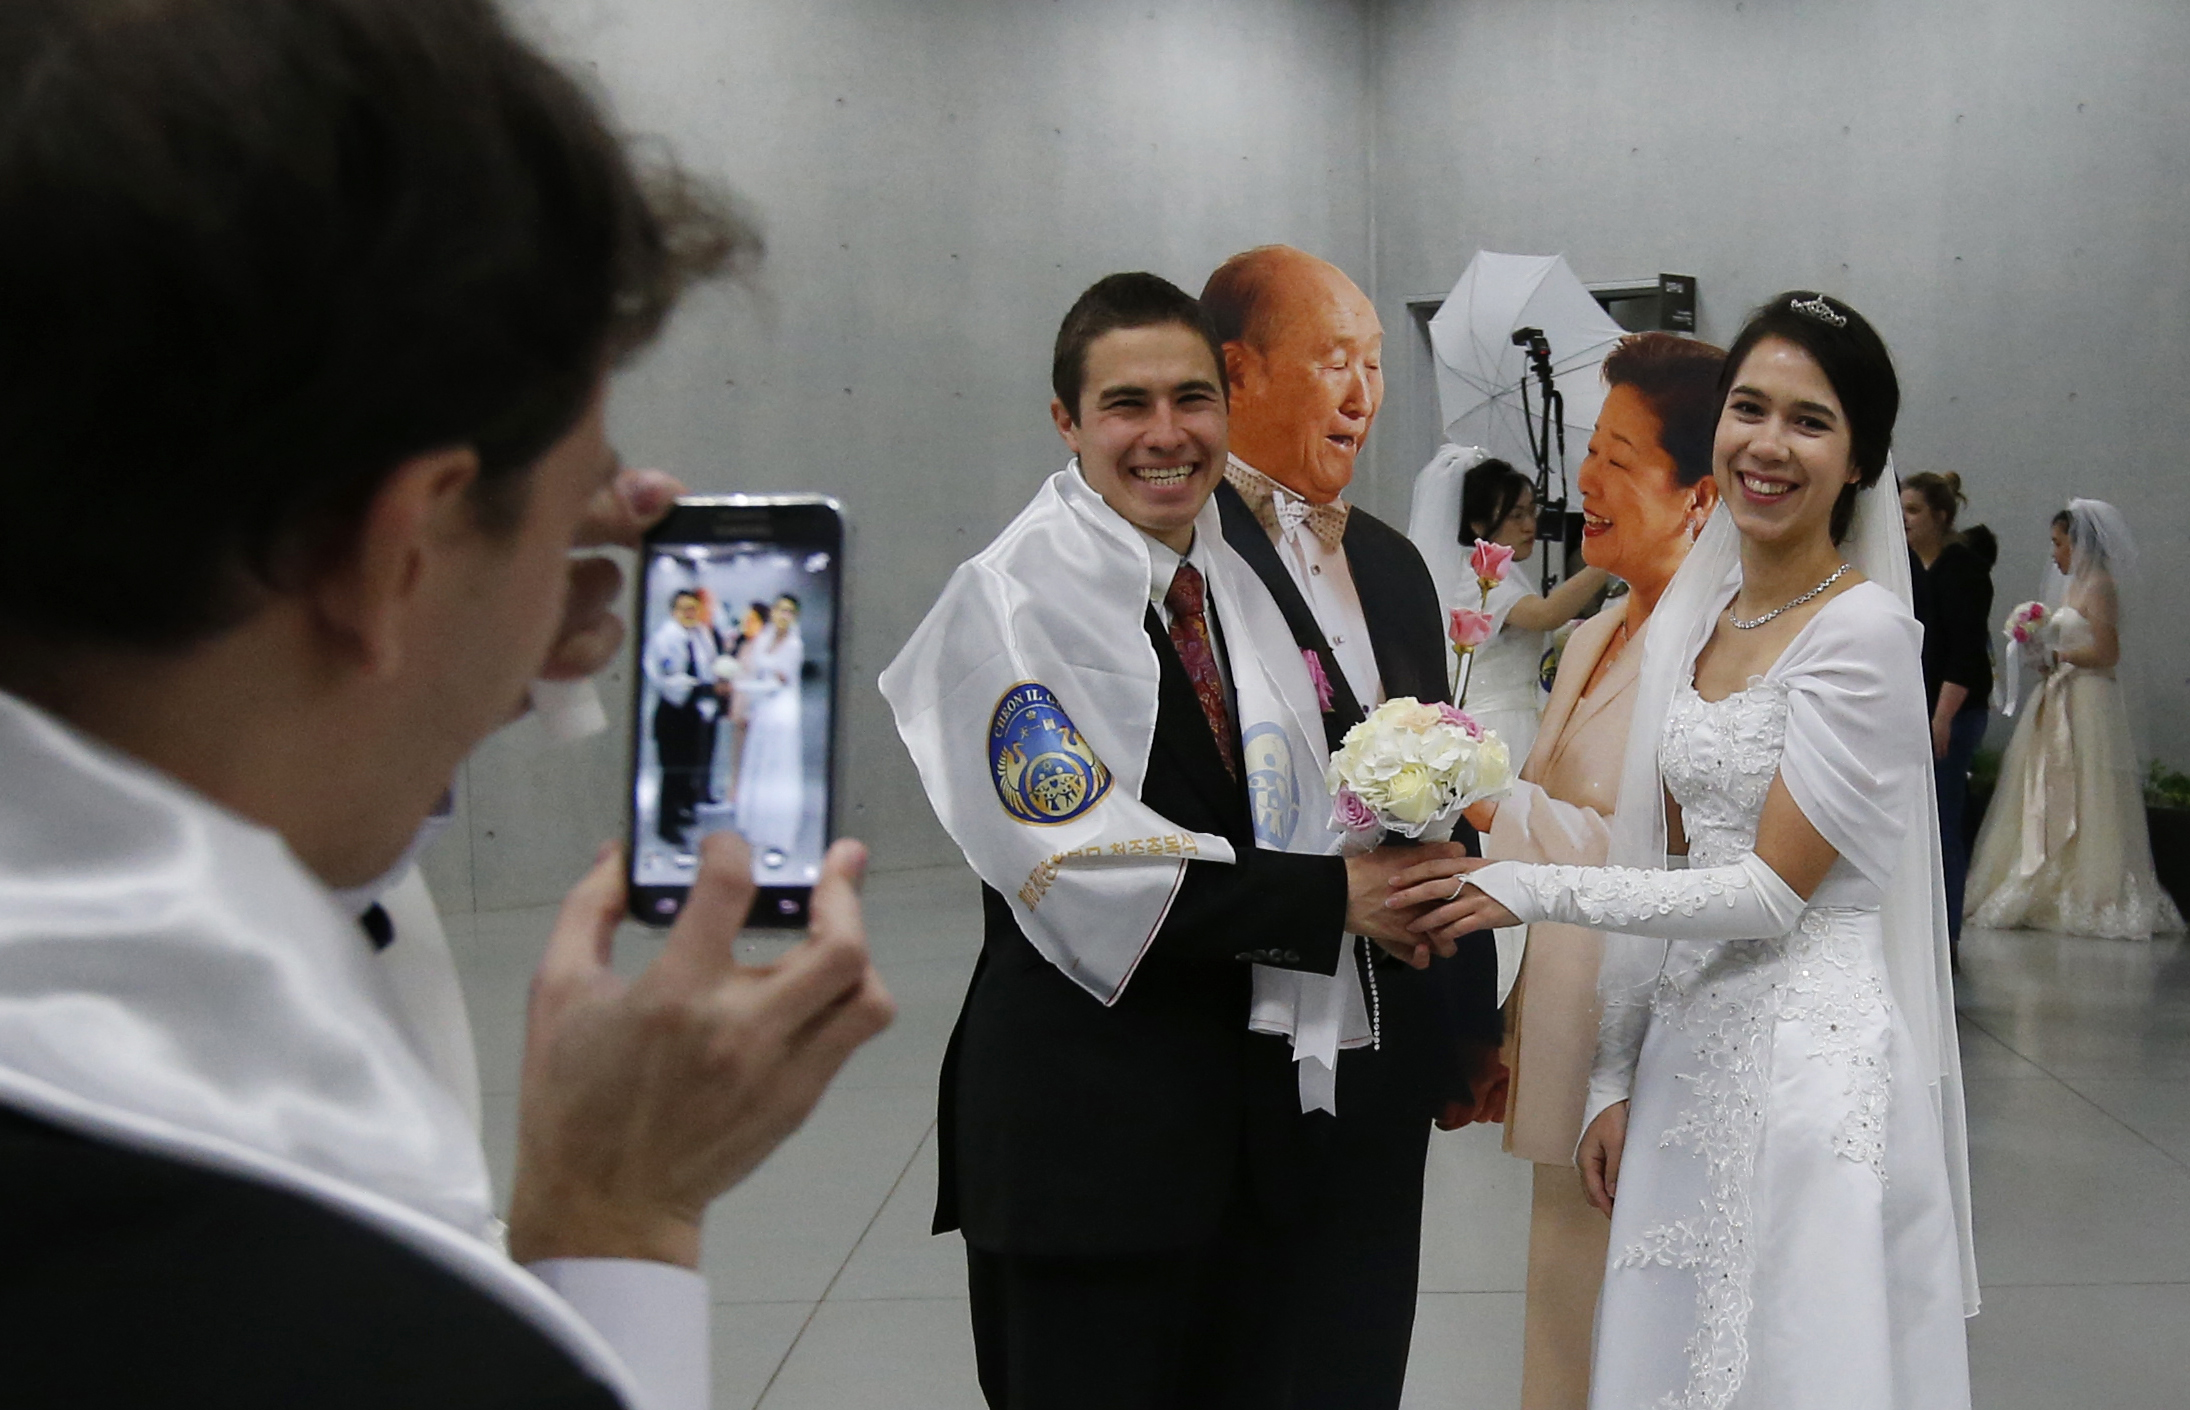 A couple have their souvenir photo taken near the cutout pictures of late Rev. Sun Myung Moon, the founder of the Unification Church and wife Hak Ja Han Moon before their mass wedding ceremony at the Cheong Shim Peace World Center in Gapyeong, South Korea, Saturday, Feb. 20, 2016. Three thousand of couples from more than 60 countries attended and other 12,000 couples participated in the Unification Church's mass wedding via live-streamed broadcast, according to the church, arranged by Hak Ja Han Moon. (AP Photo/Lee Jin-man) South Korea Mass Wedding